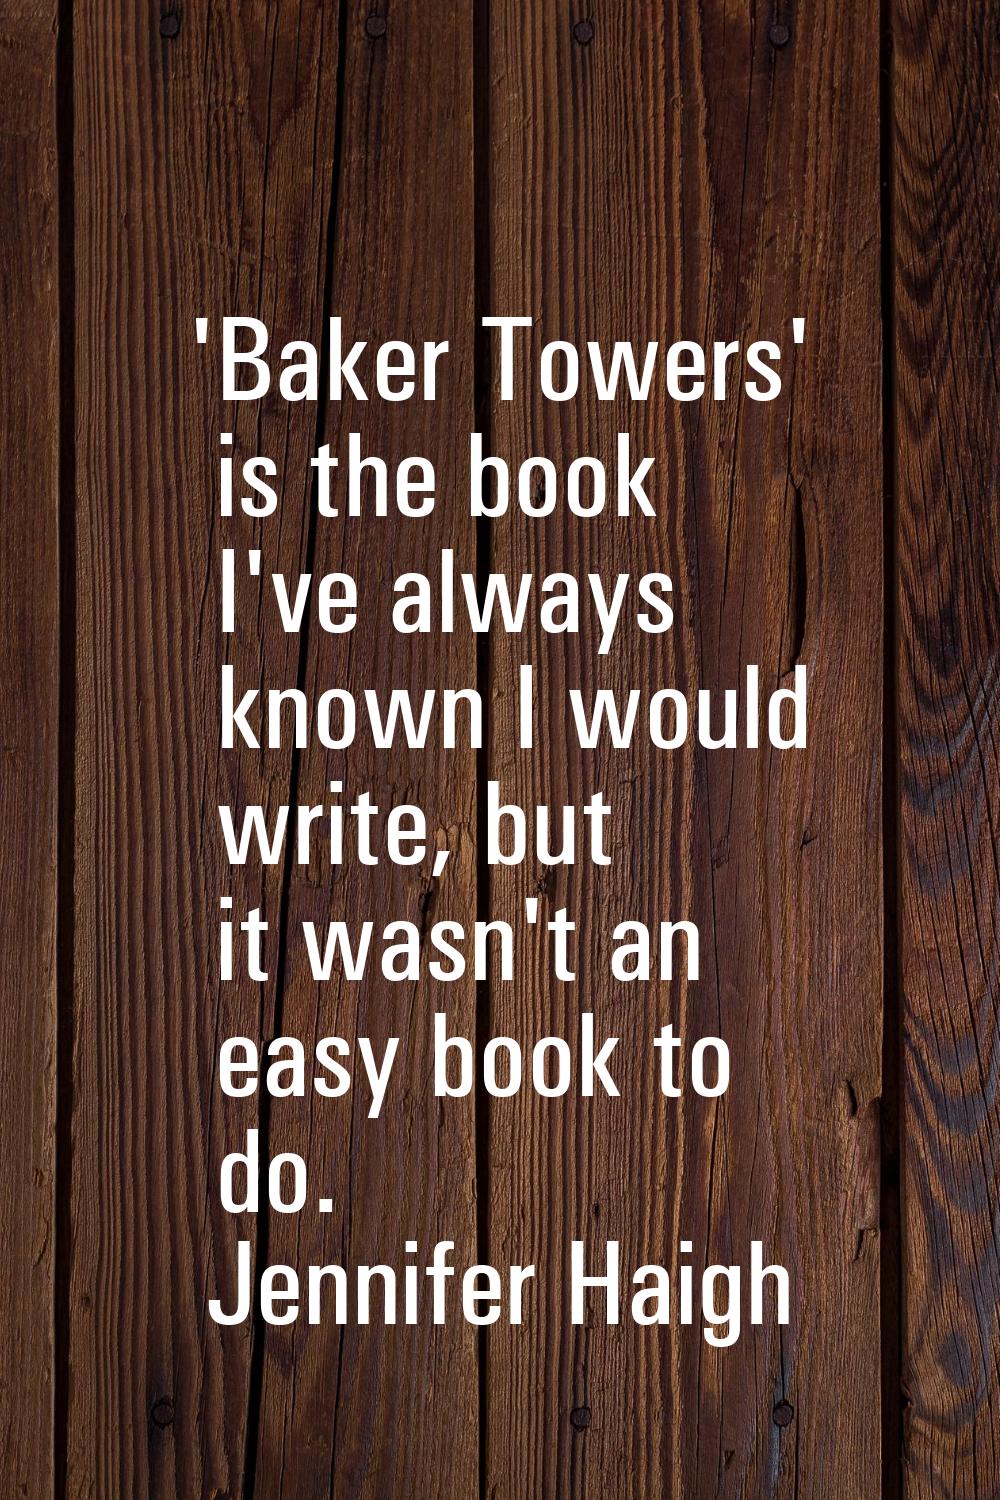 'Baker Towers' is the book I've always known I would write, but it wasn't an easy book to do.